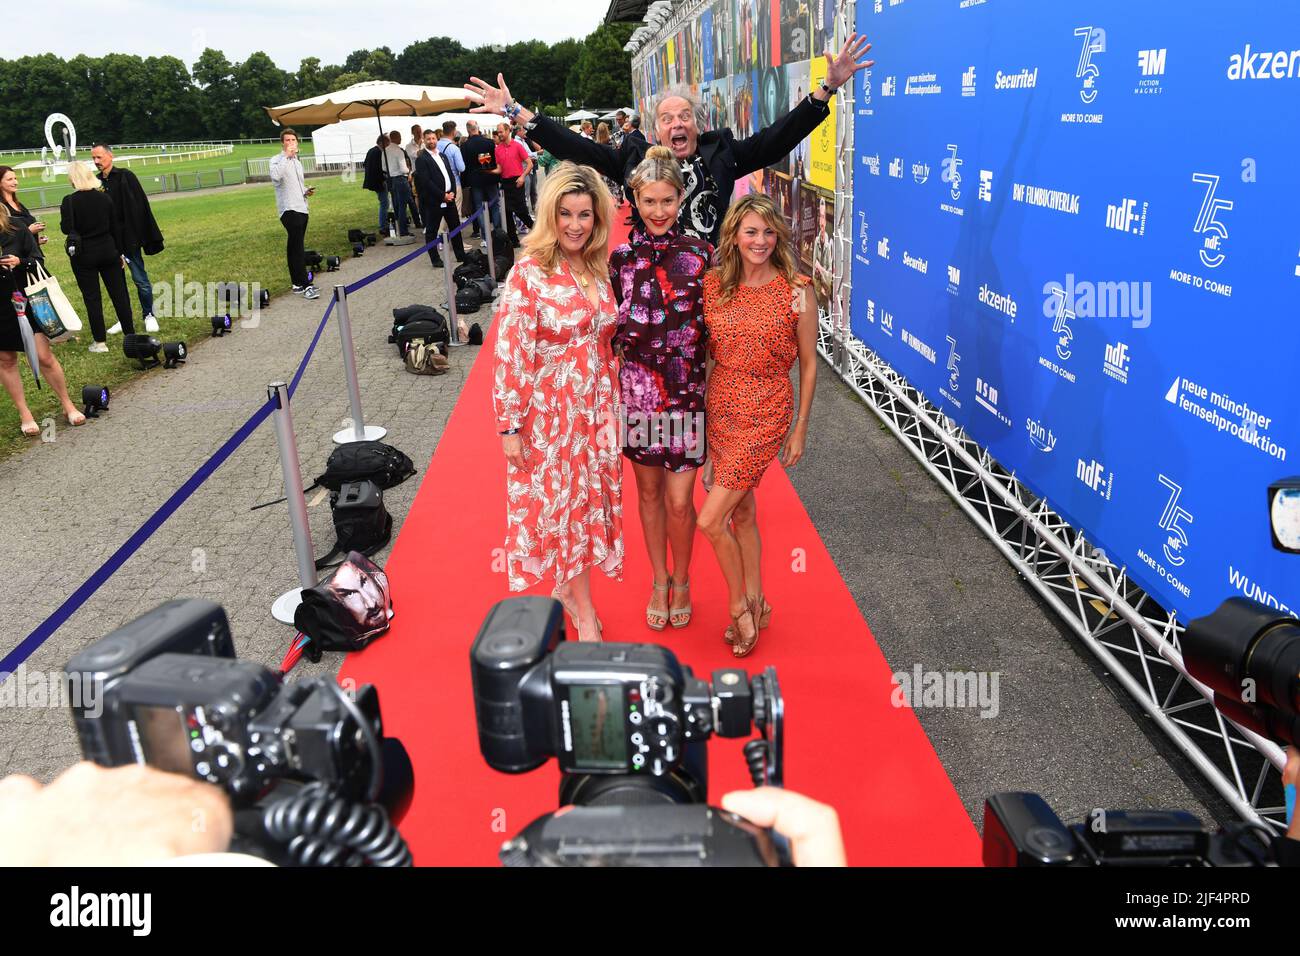 Munich, Germany. 29th June, 2022. Actor Wolfgang Fierek (back) and actress Alexa Maria Surholt (l-r) actress Wolke Hegenbarth and actress Luise Bähr arrive at the '75 Years of ndF' event taking place at the Riem racecourse as part of the Munich Film Festival. The new German Film Company Ltd (ndF) is celebrating its 75th anniversary this year. Credit: Felix Hörhager/dpa/Alamy Live News Stock Photo